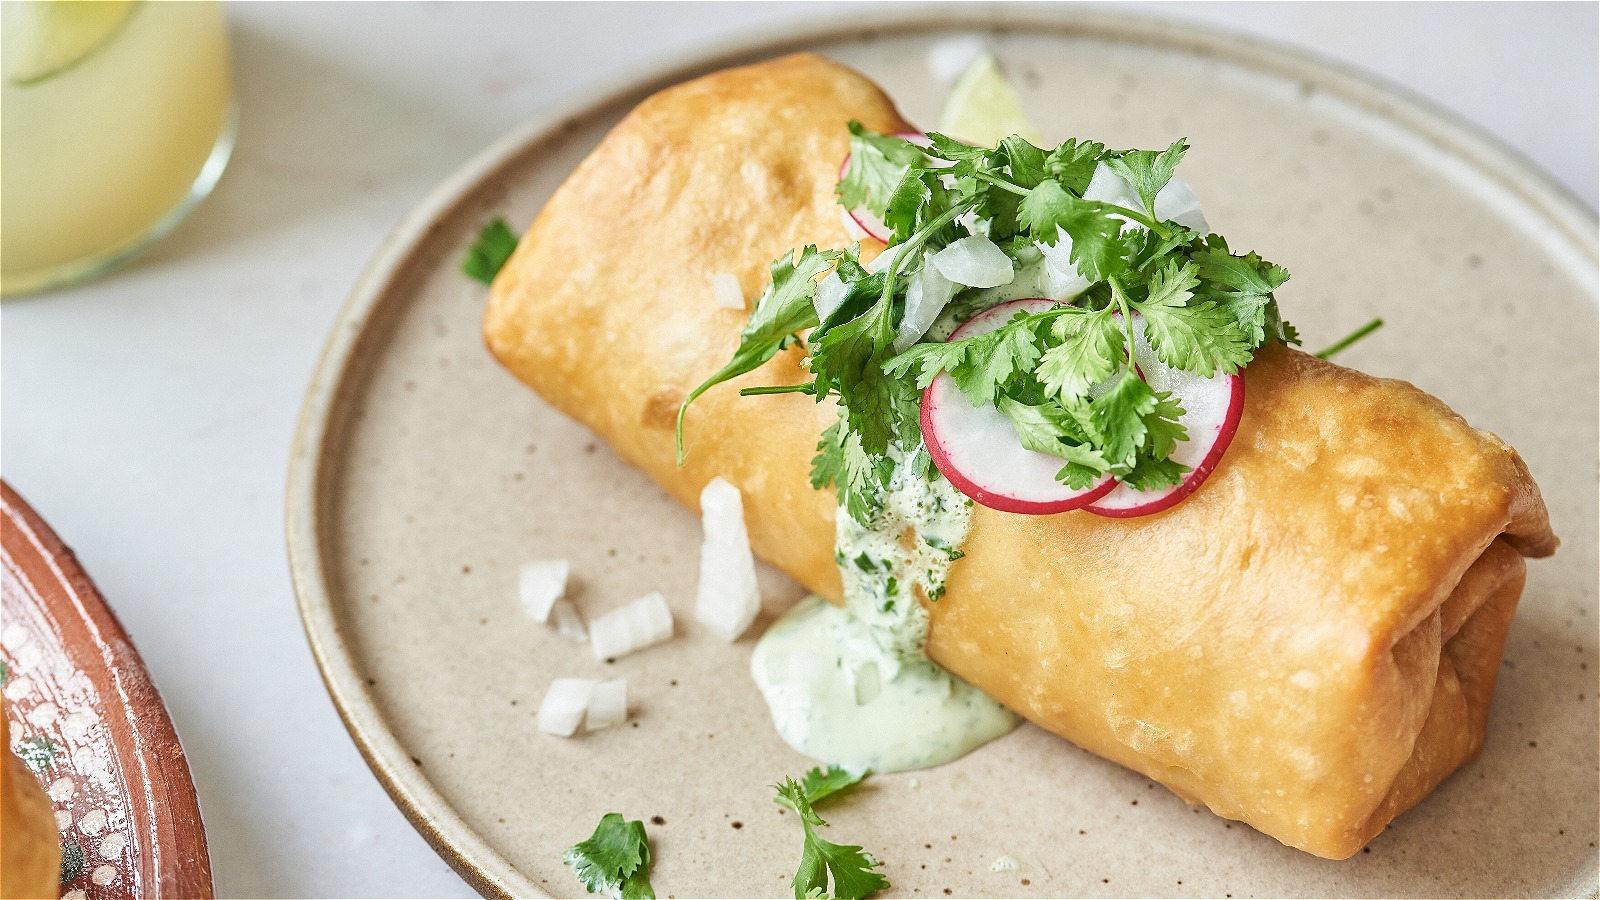 The Best Pork Chimichangas Recipe with Salsa Verde - My Latina Table